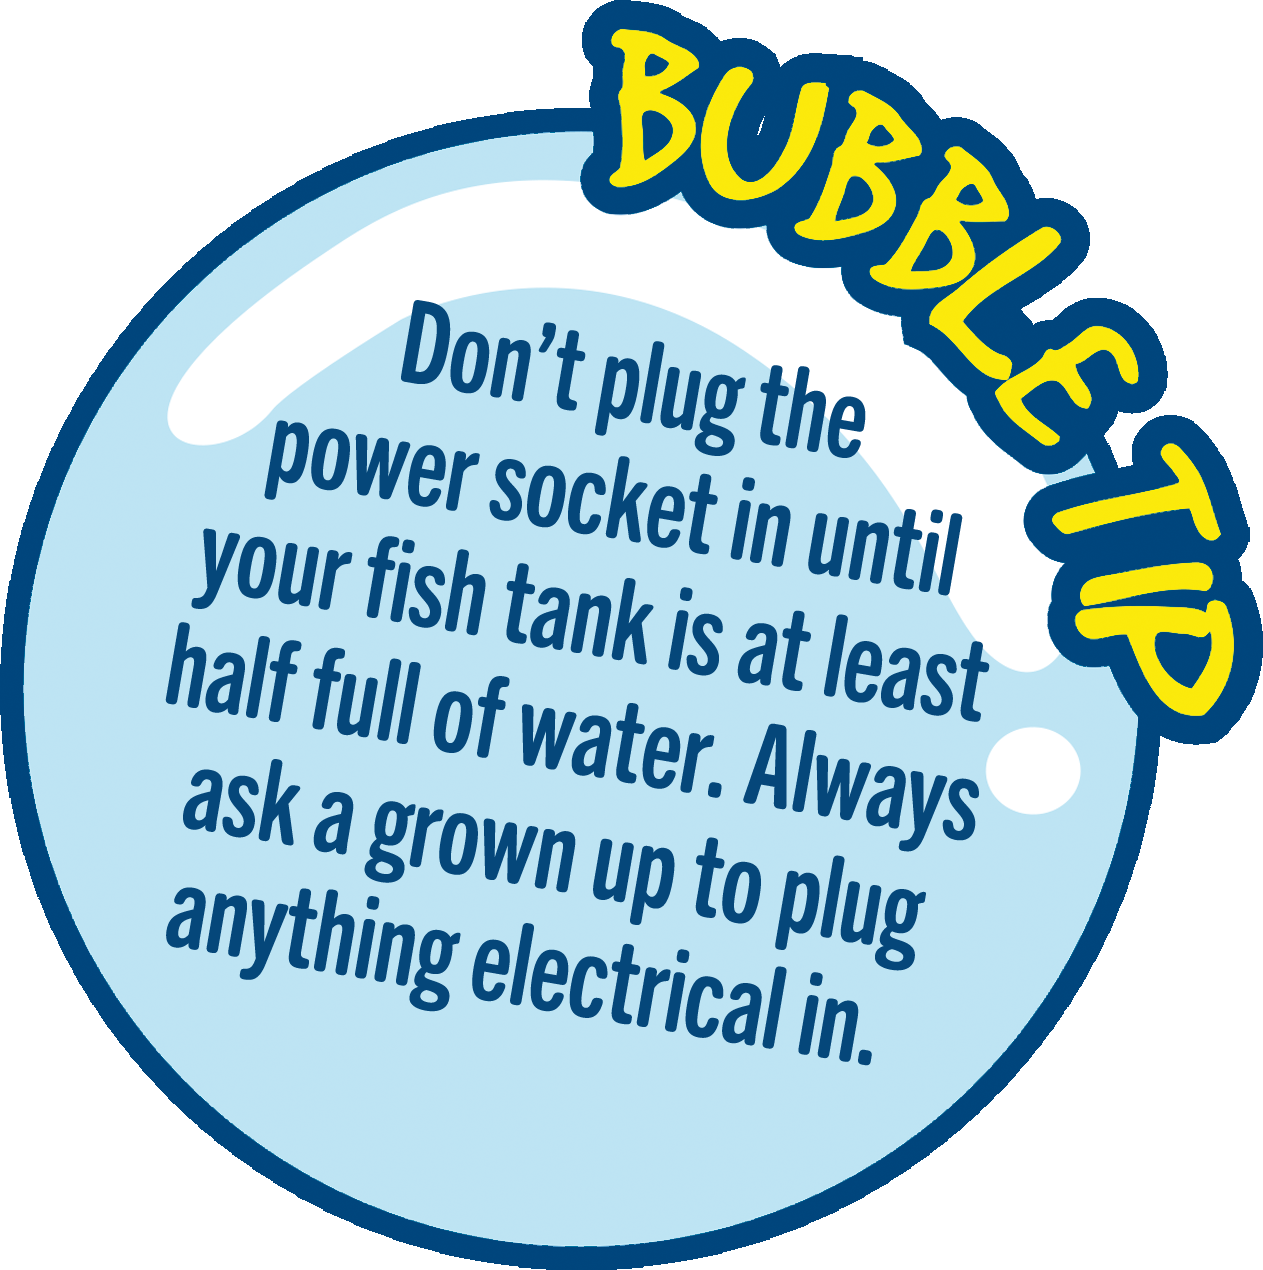 Don’t plug the power socket in until your fish tank is at least half full of water. Always ask a grown up to plug anything electrical in.